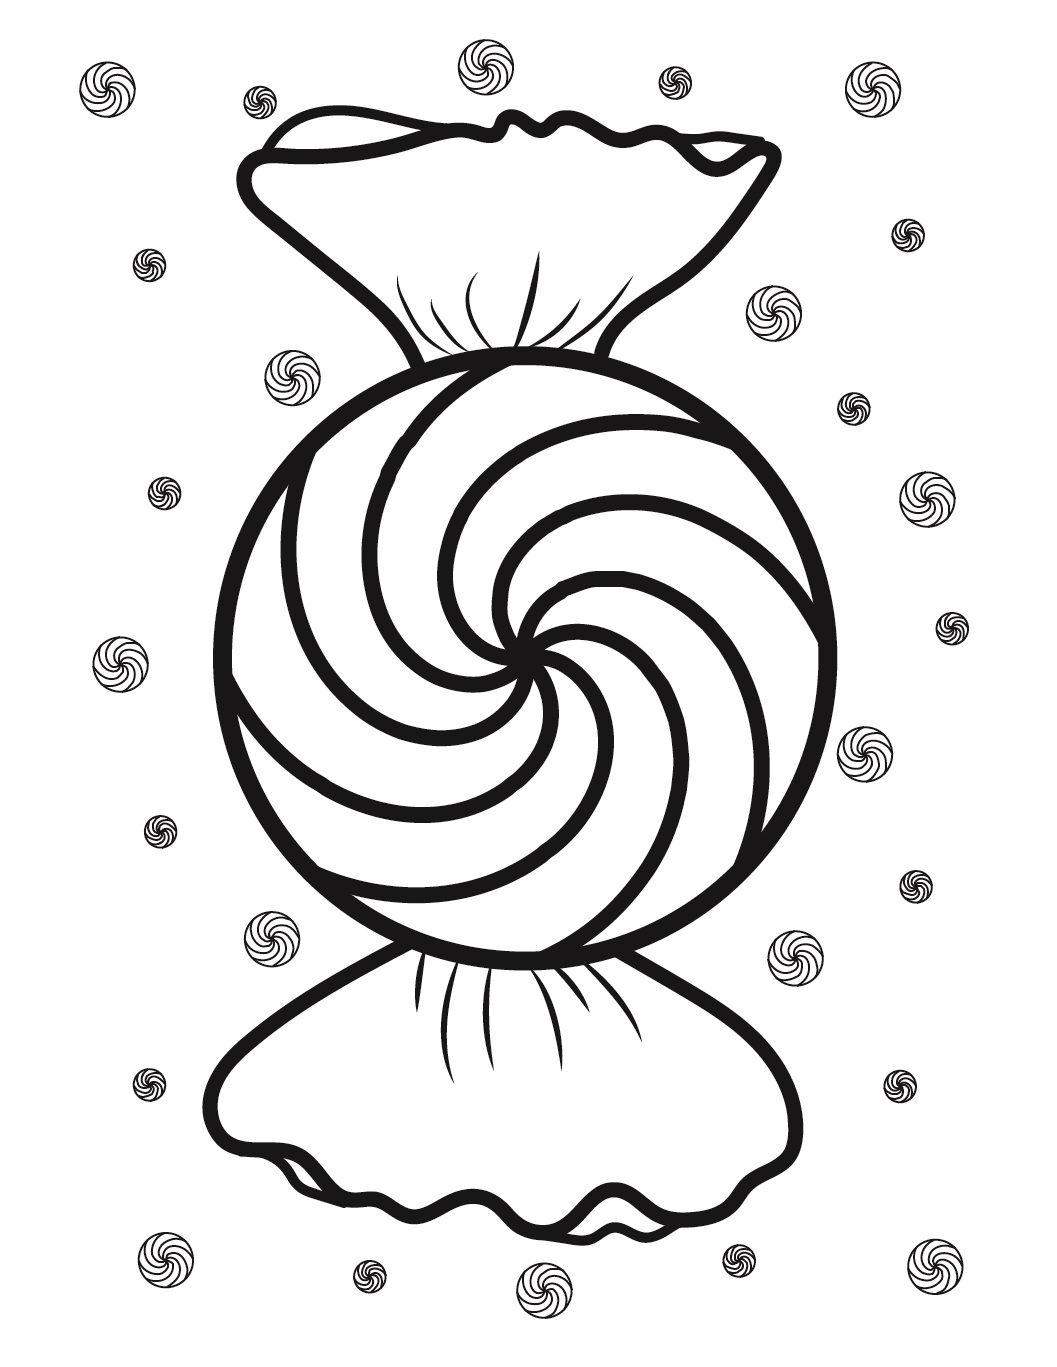 Sweets Coloring Pages – Chocolate Surprise Wrapped